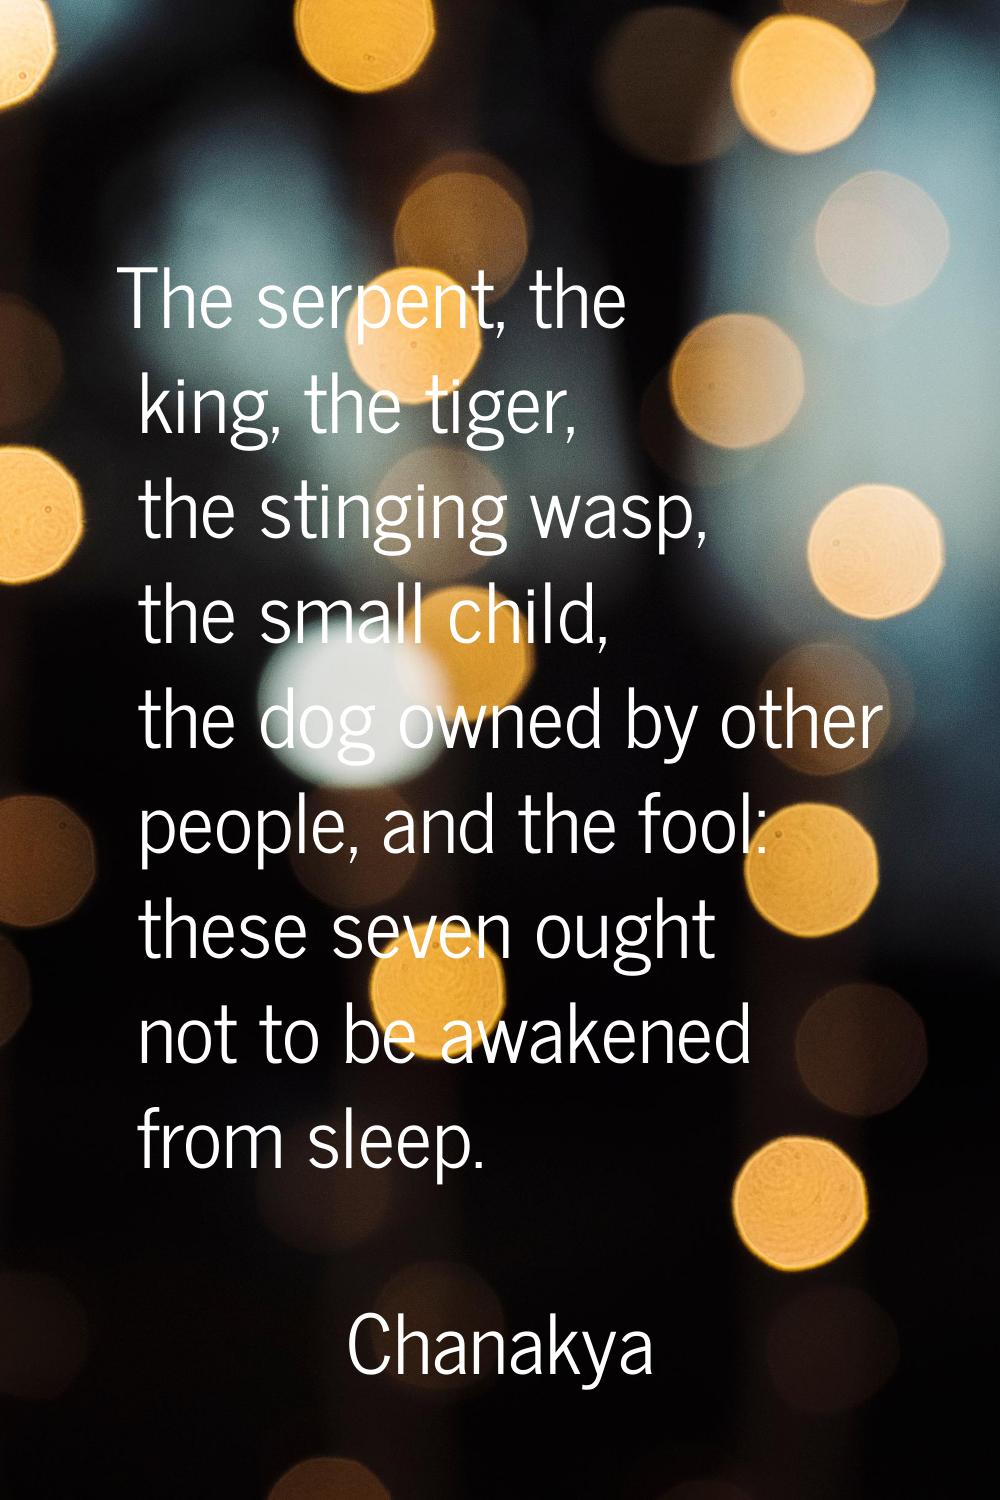 The serpent, the king, the tiger, the stinging wasp, the small child, the dog owned by other people